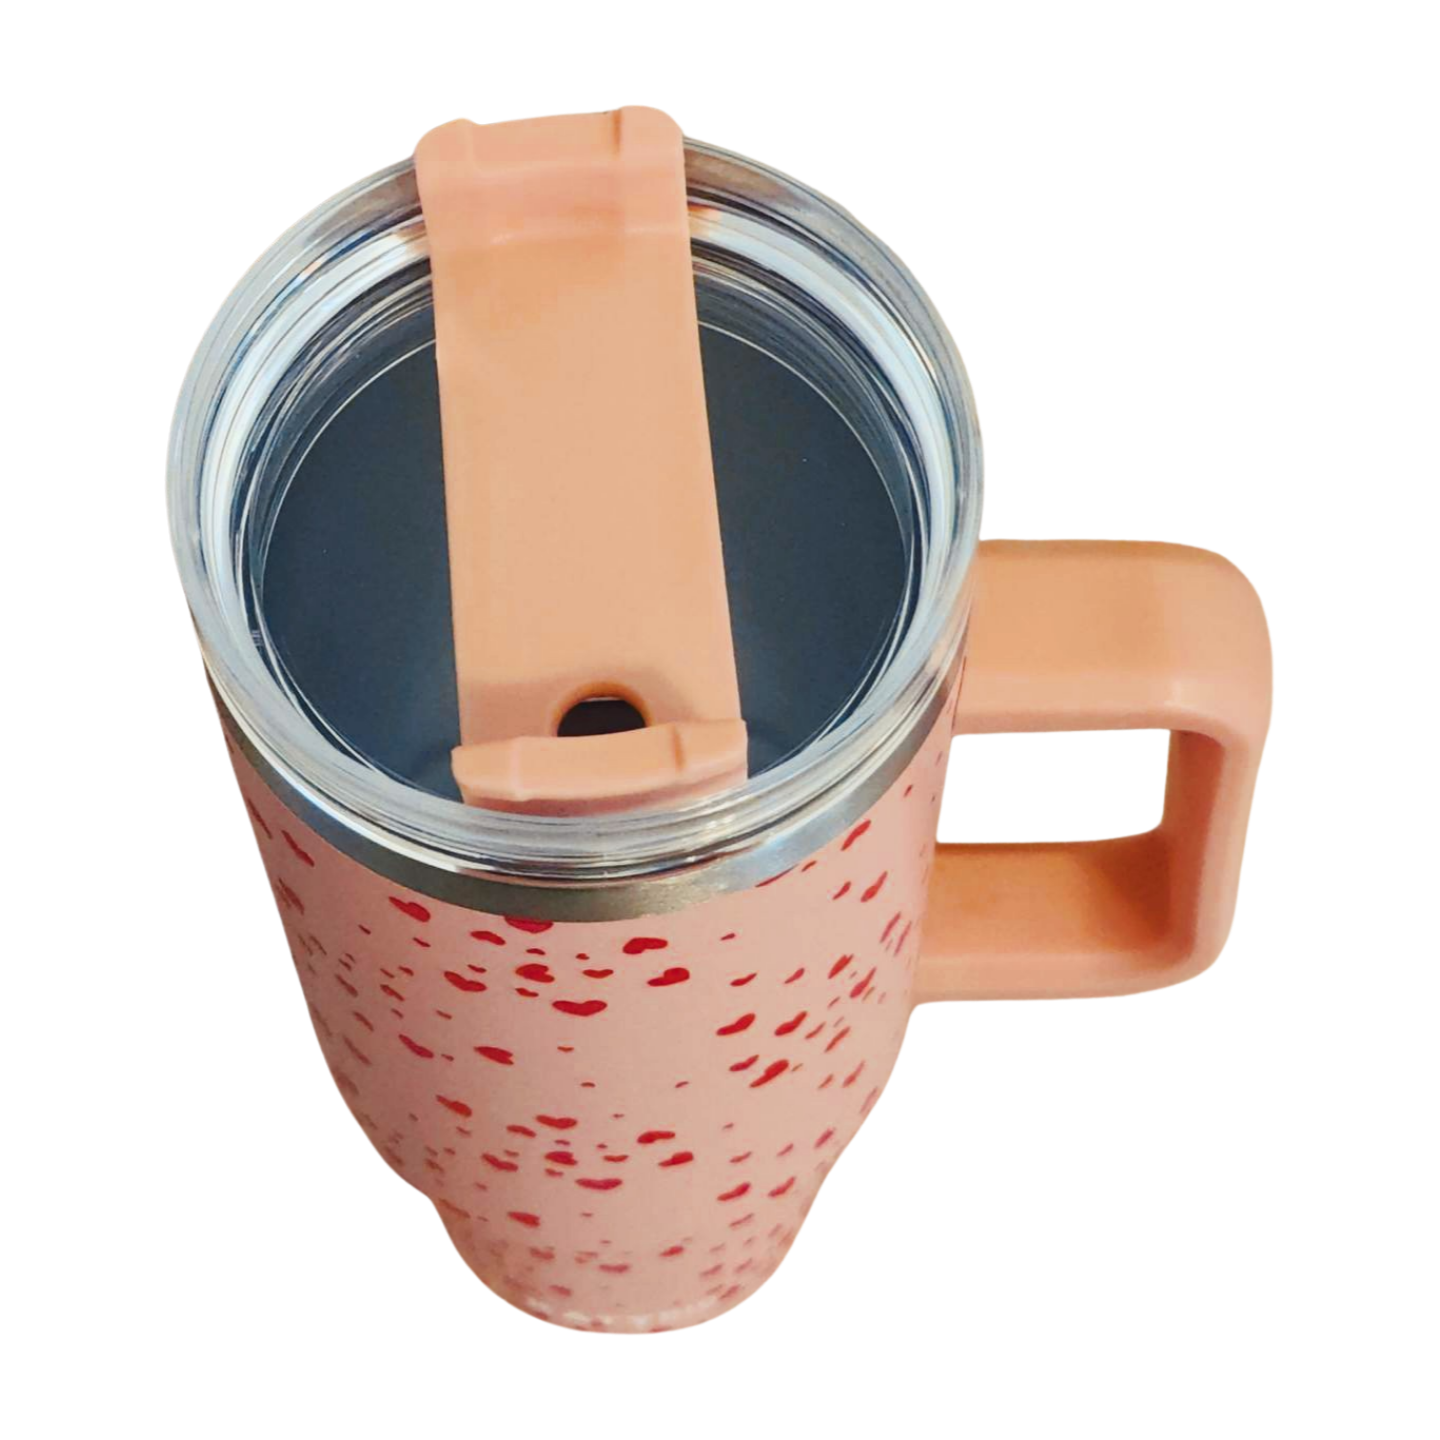 40 oz Tiny Red Hearts Pink Tumbler Cup (Limited Supply)